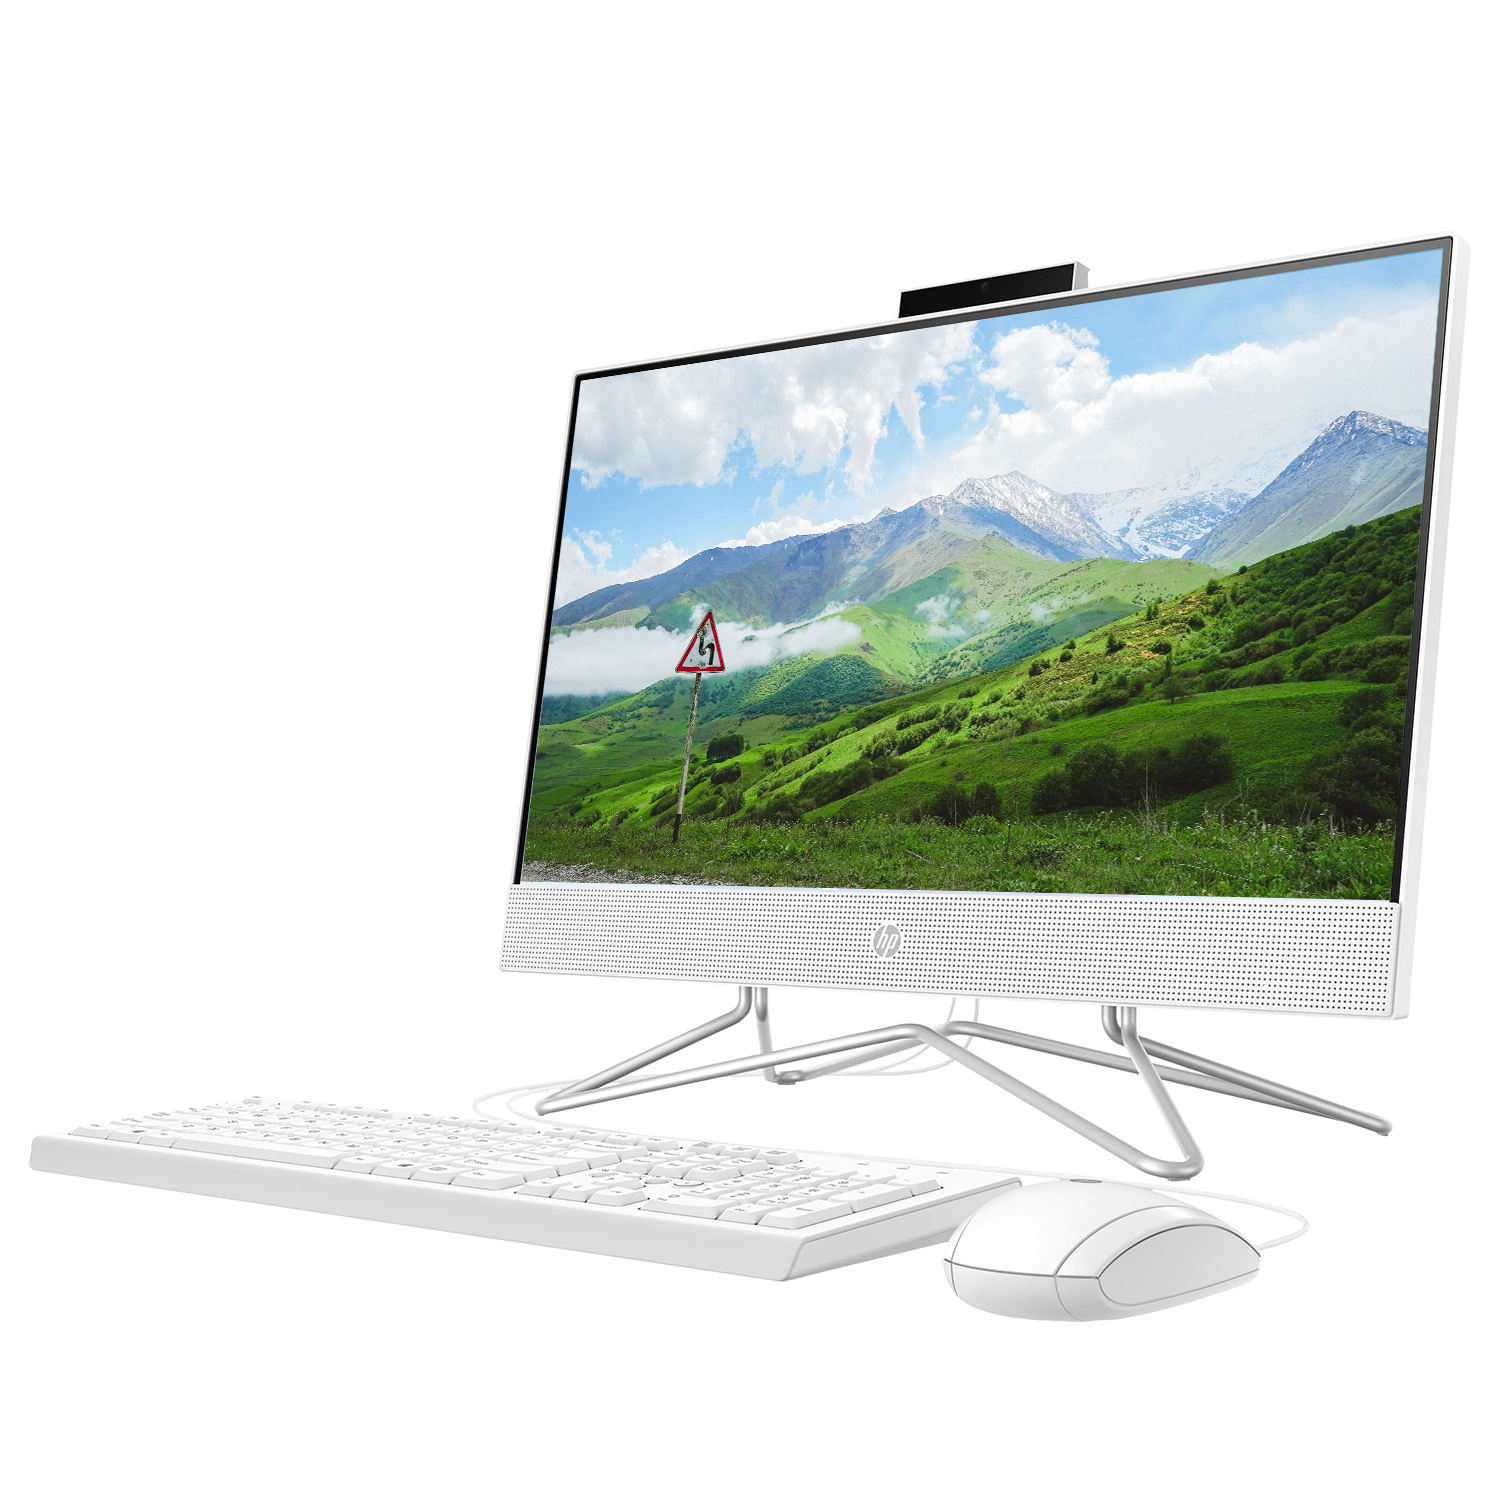 HP All-in-One Desktop, 21.5" FHD Screen, Intel Celeron J4025, 32GB RAM, 1TB SSD, Webcam, HDMI, Media Card Reader, Wi-Fi, Wired KB & Mouse, Windows 11 Home - image 2 of 5